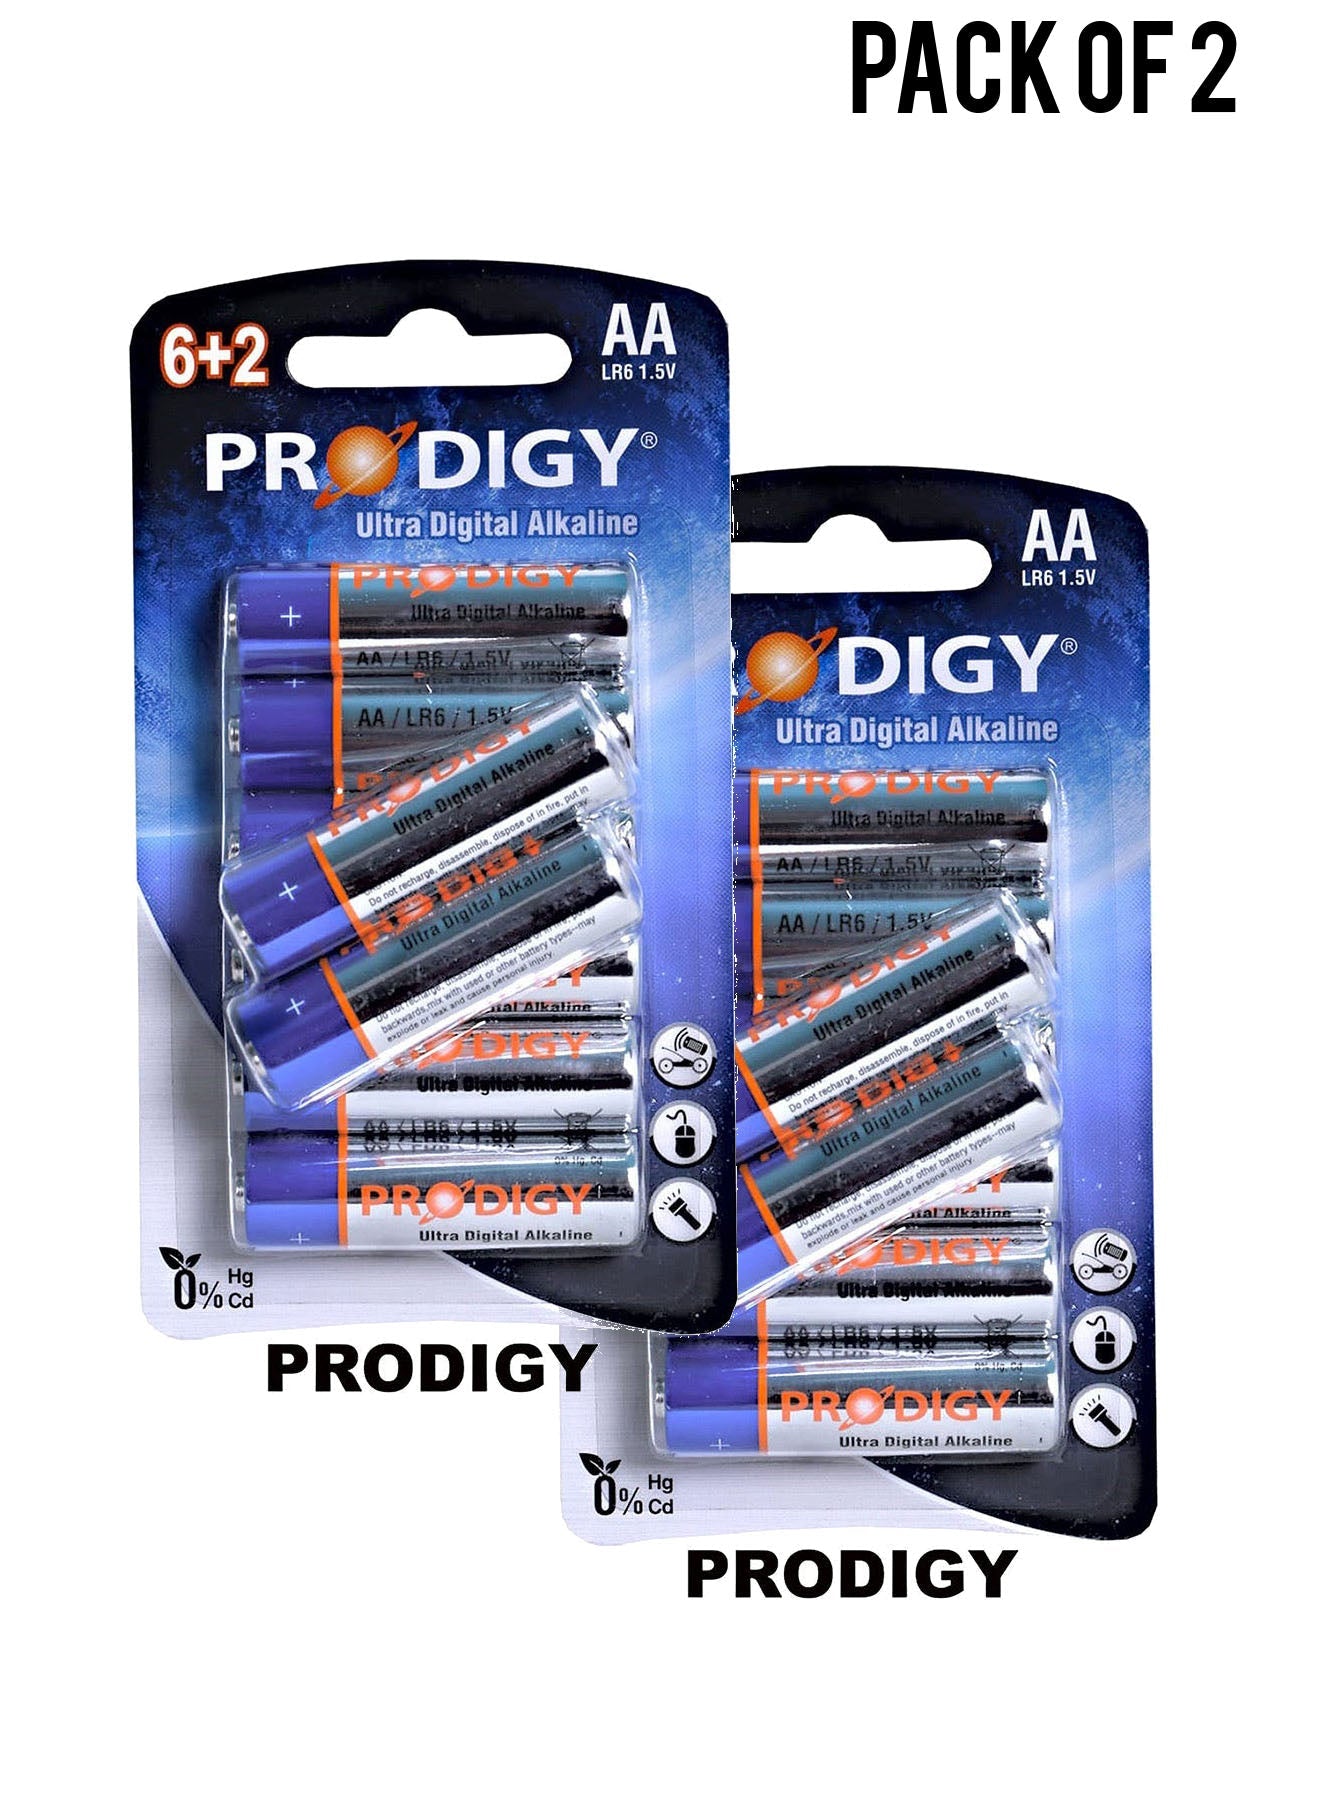 Prodigy Alkaline LR6UD 62B AA8 Value Pack of 2 